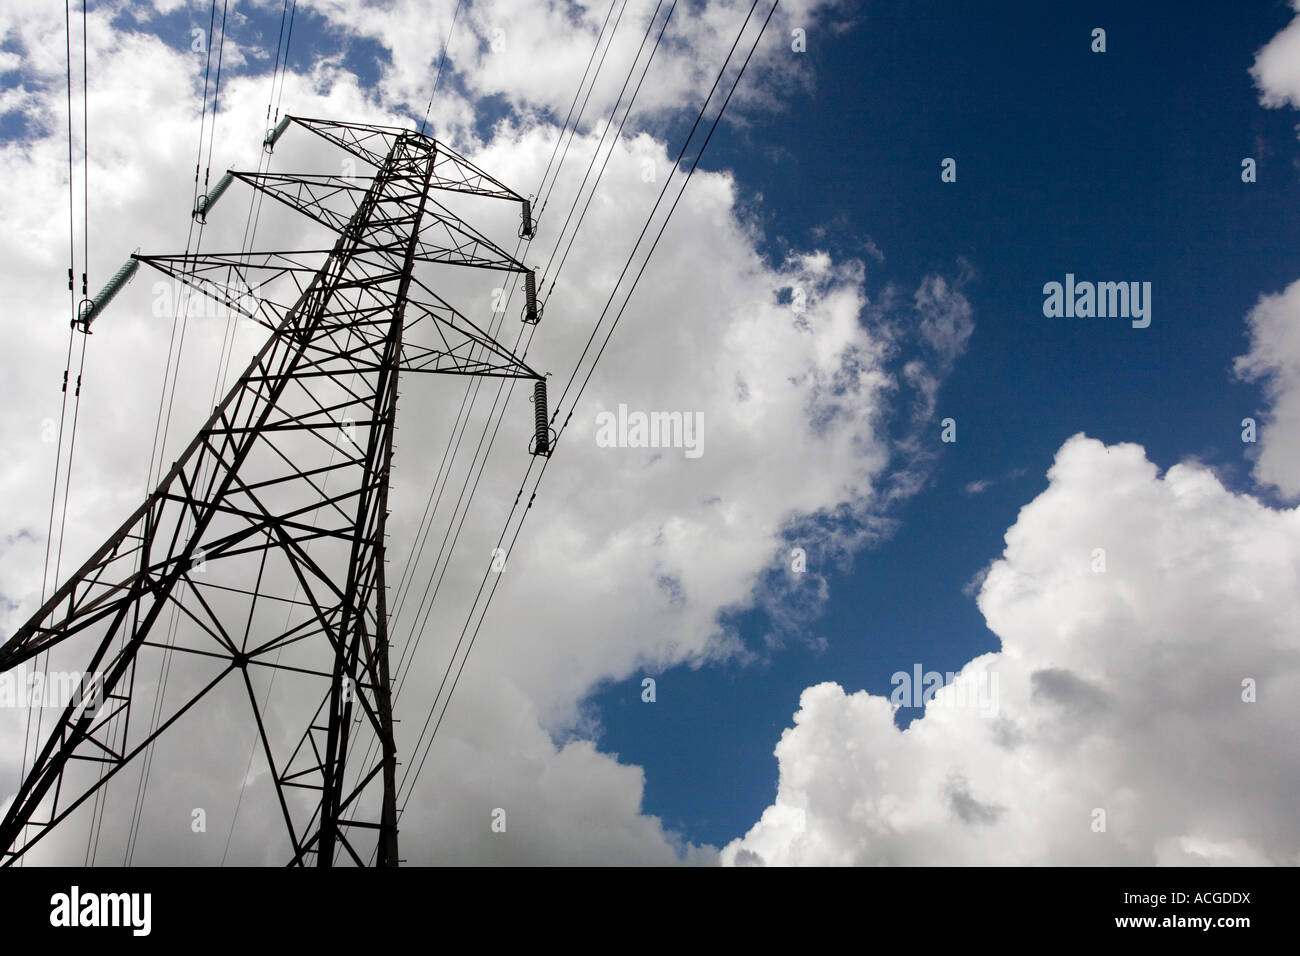 Electricity pylon against blue sky and clouds Stock Photo